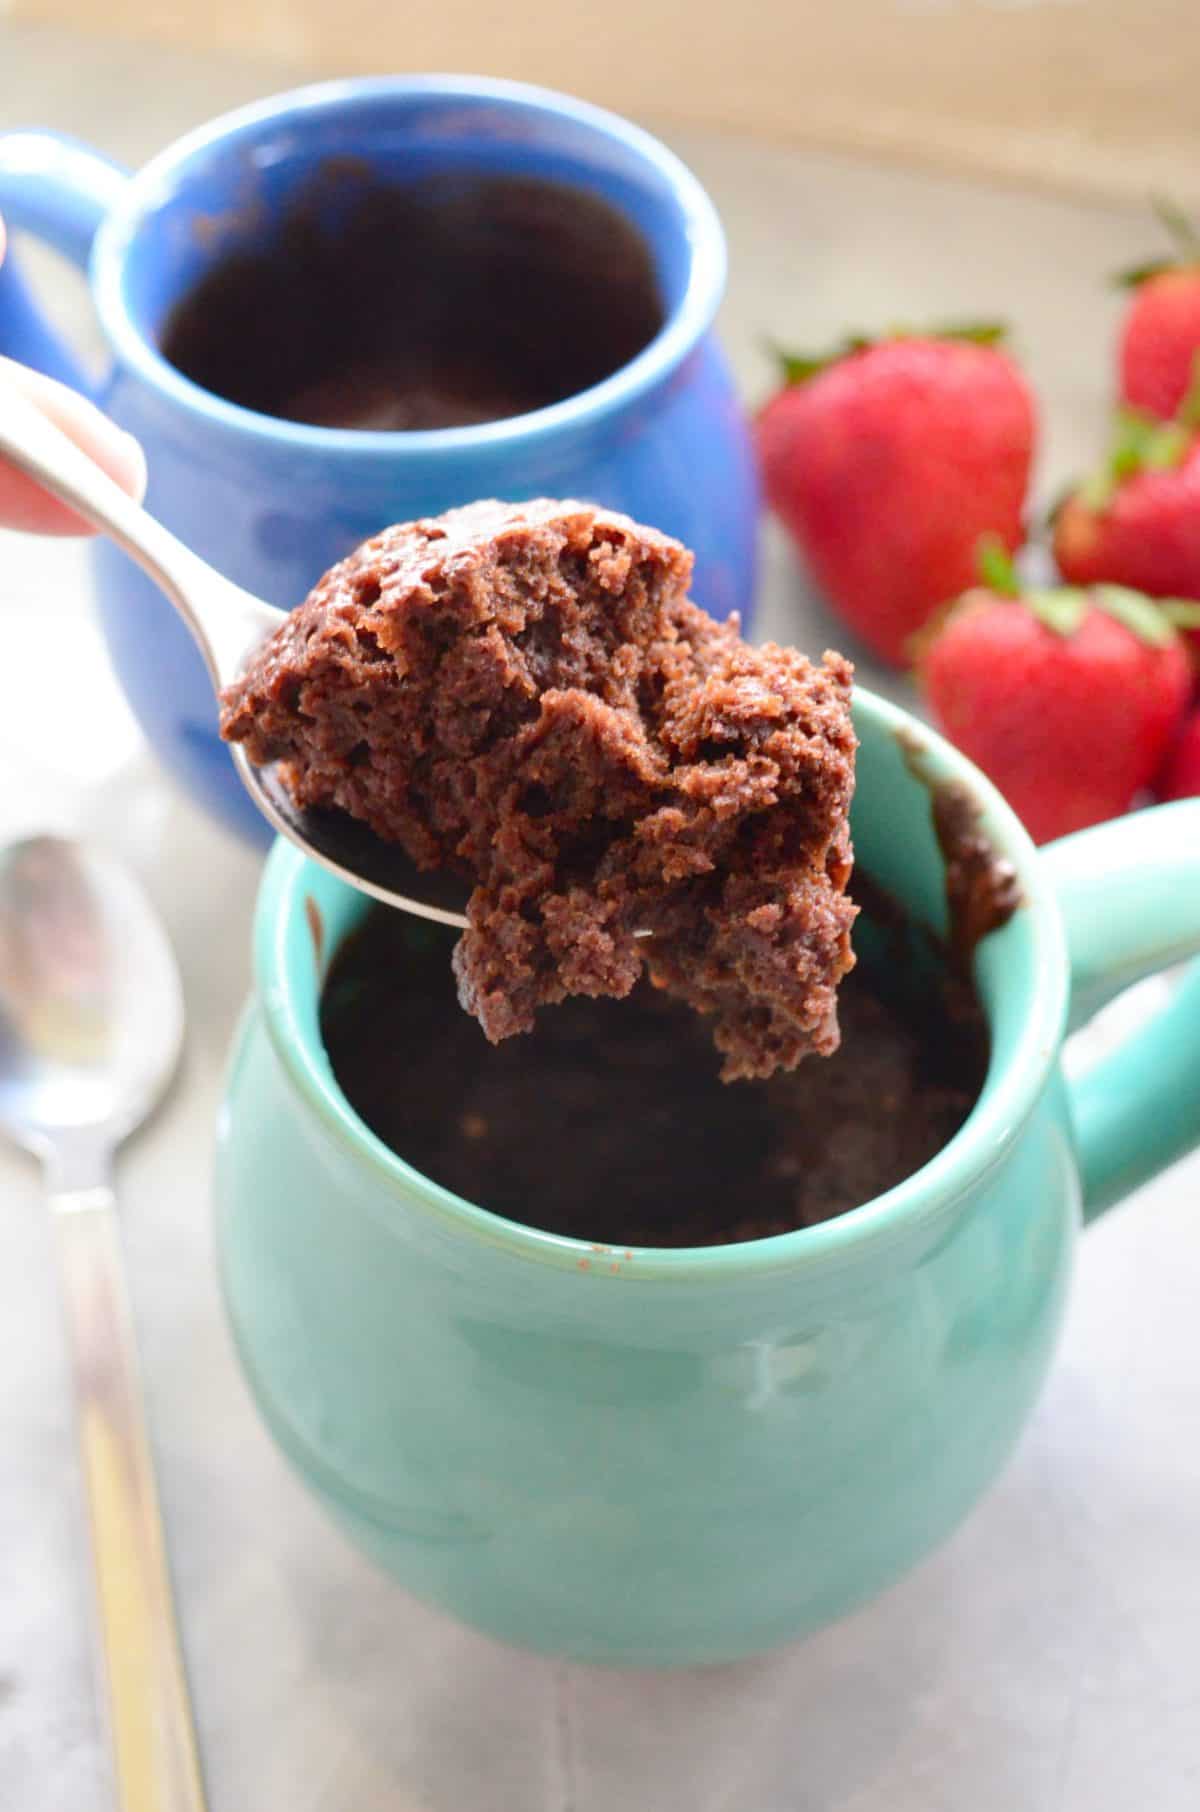 spoonful of chocolate cake held over 2 mugs of cake with strawberries on countertop by it.